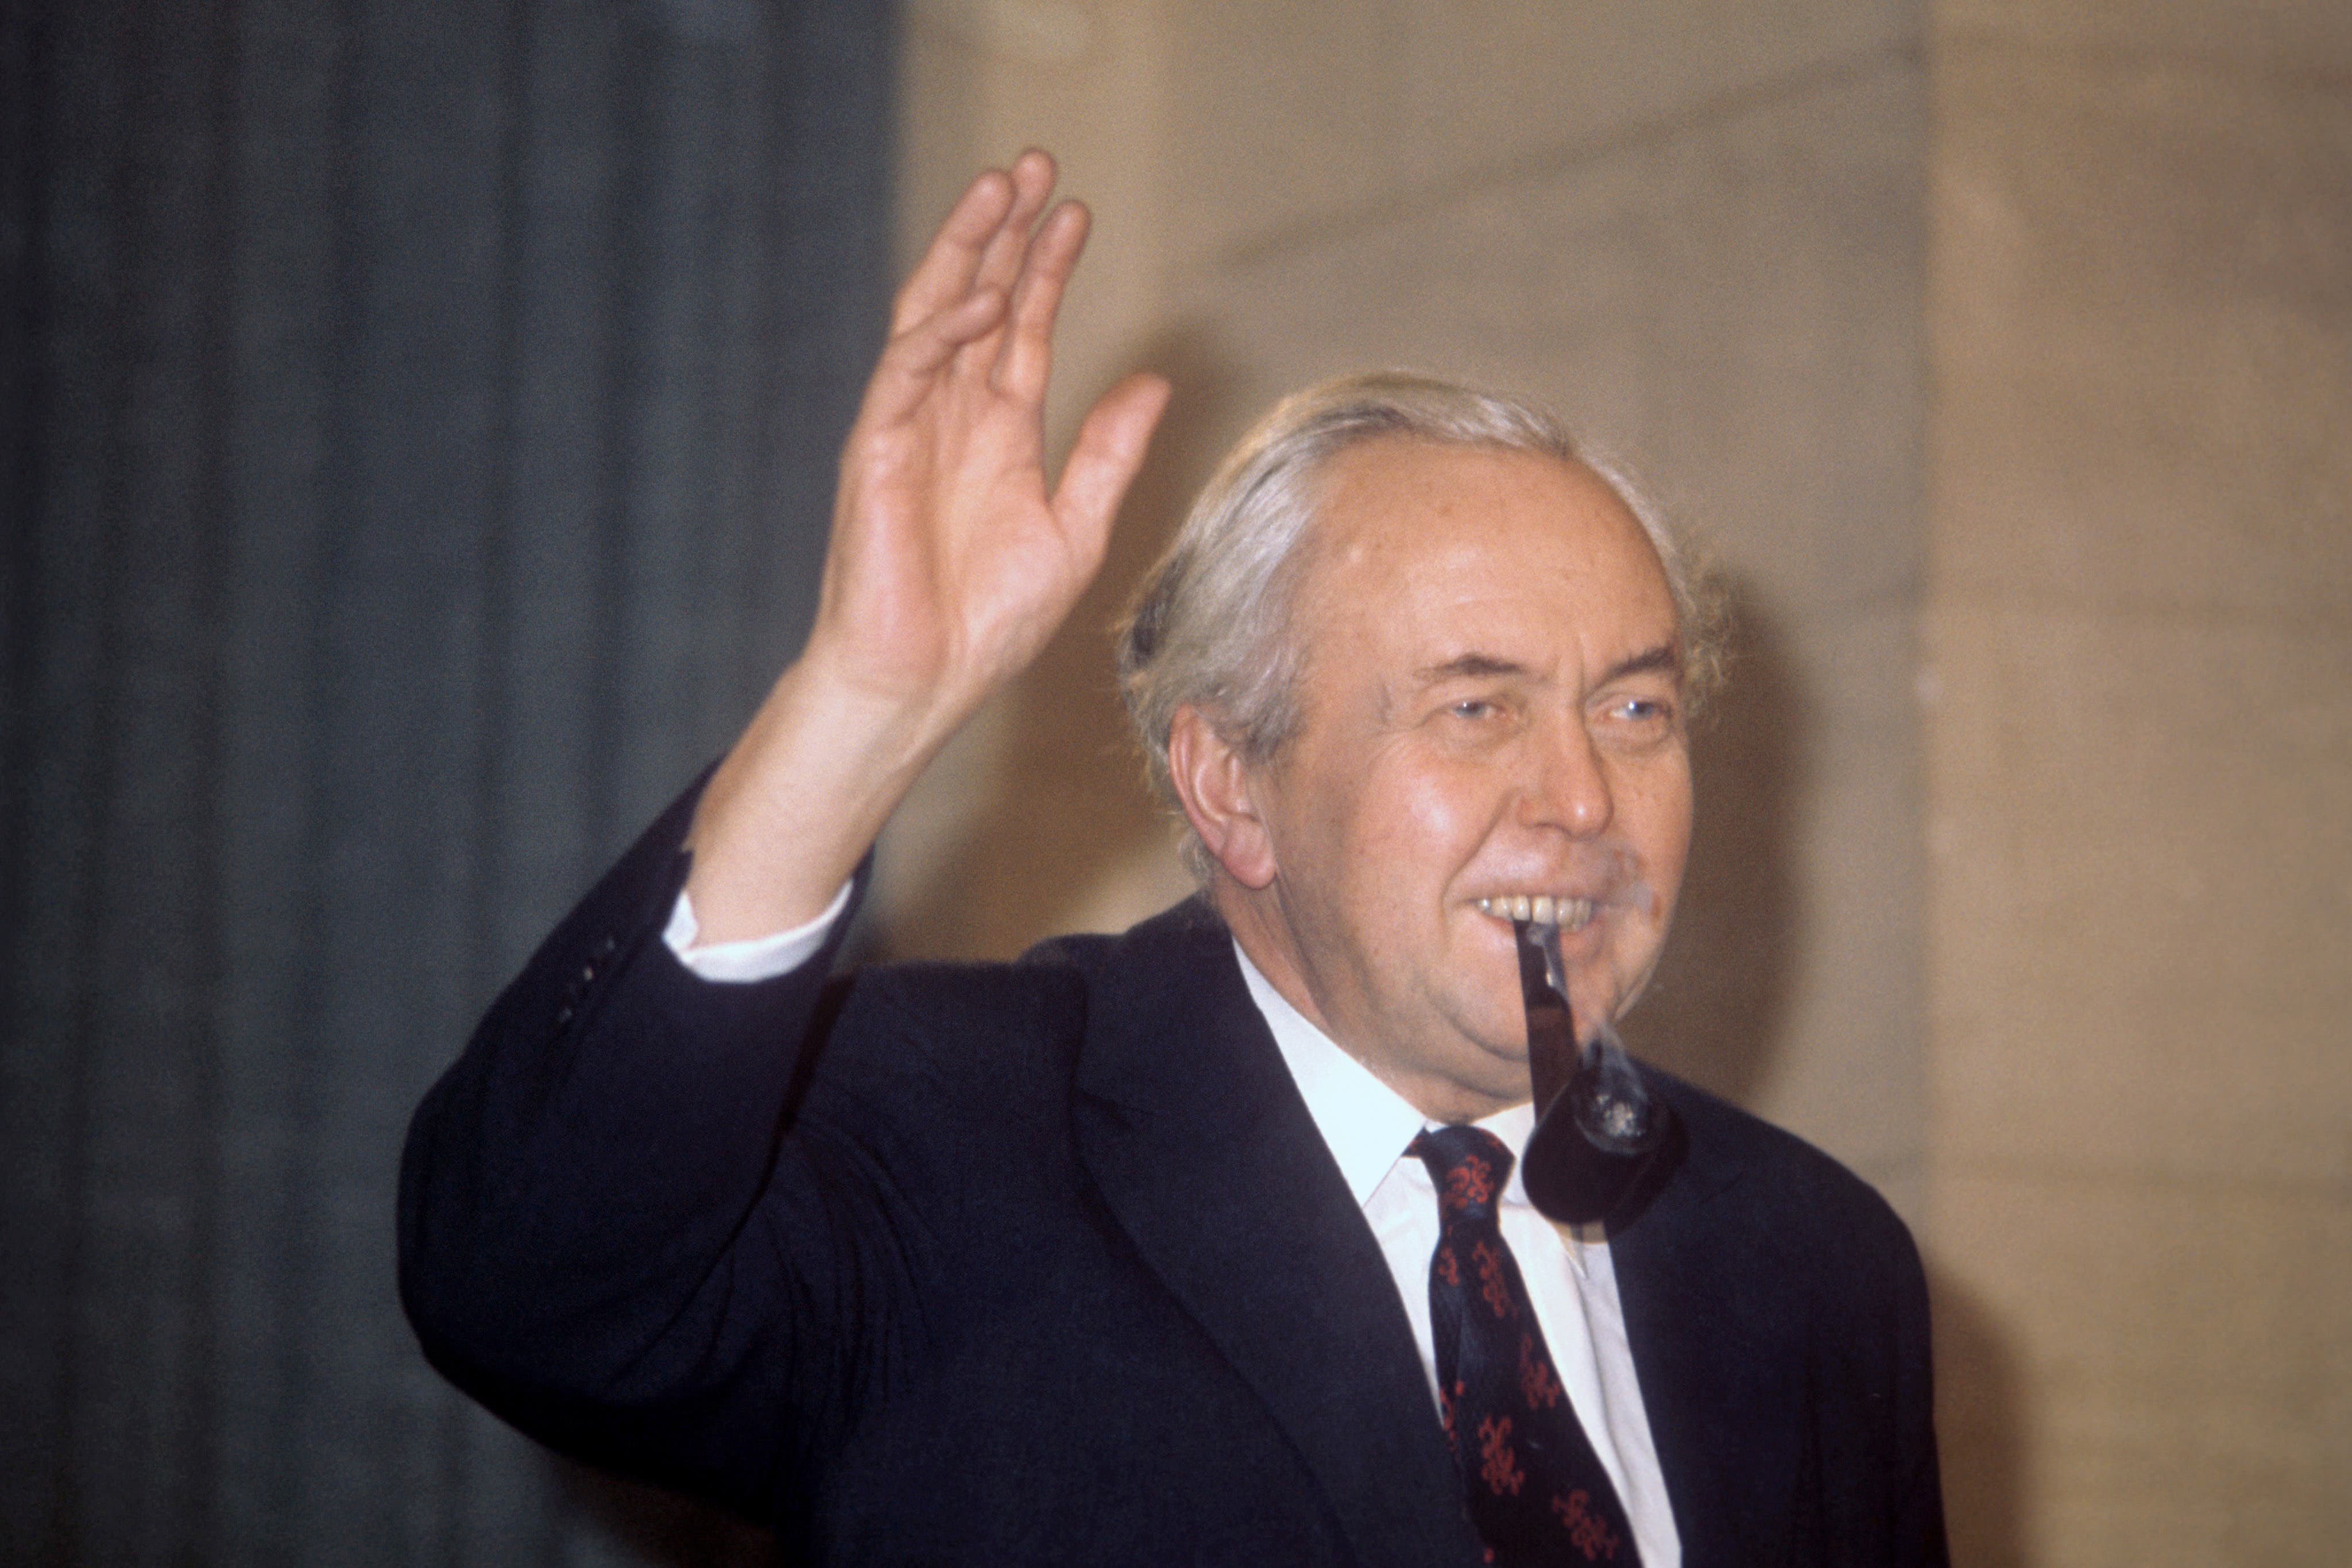 Harold Wilson had an affair with his deputy press secretary during his final years in Downing Street, his former advisers have revealed